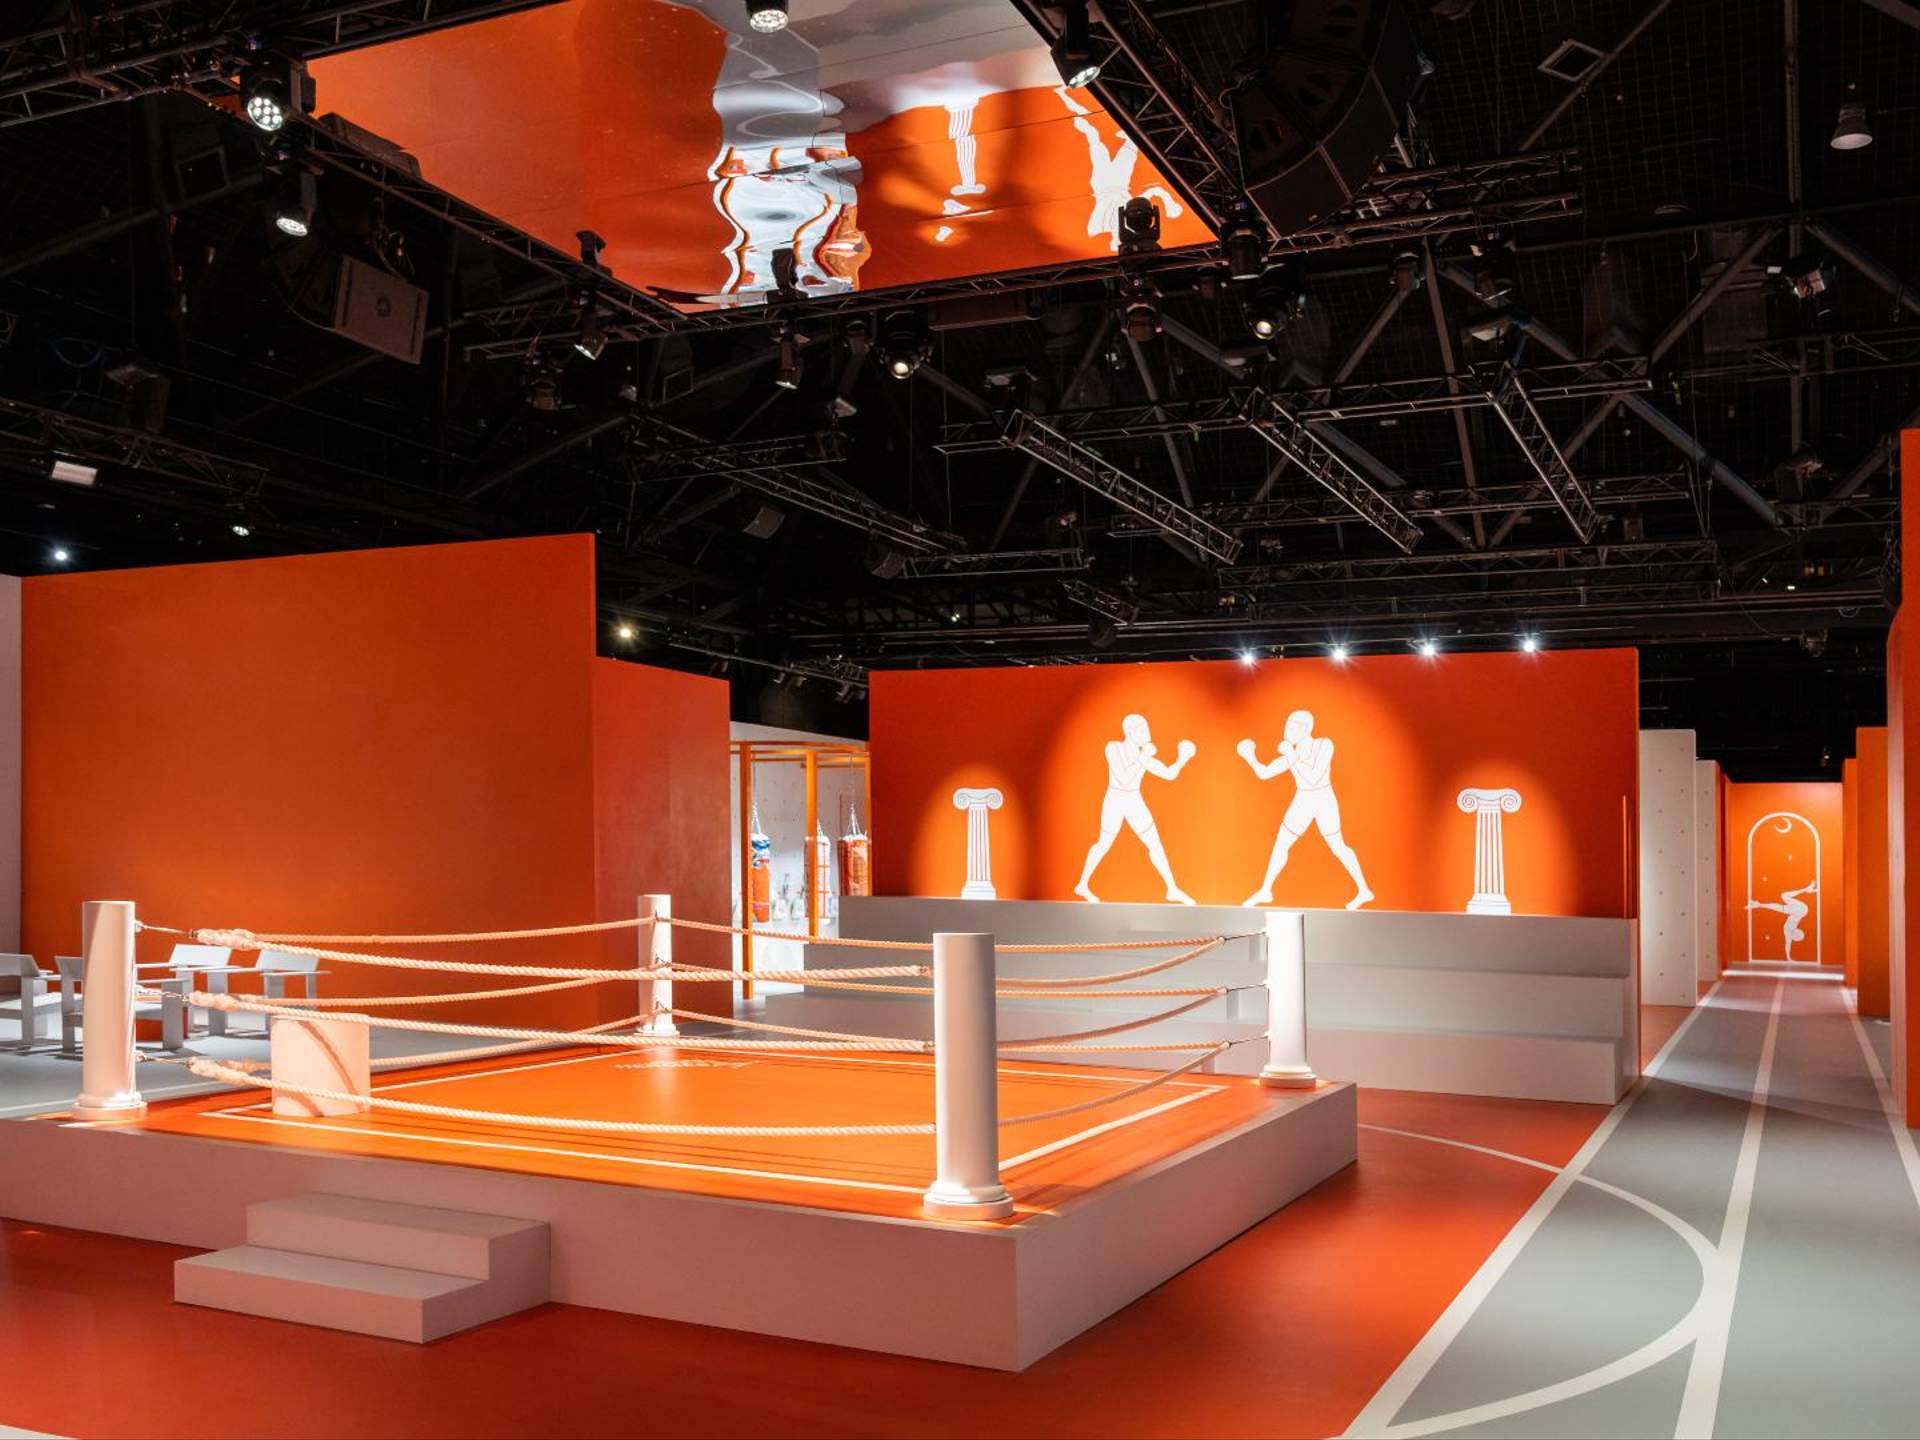 Hermès Fit, a pop-up featuring its very own gym, adorned with hermes'  signature orange color and pattern, while also exhibiting some of its…